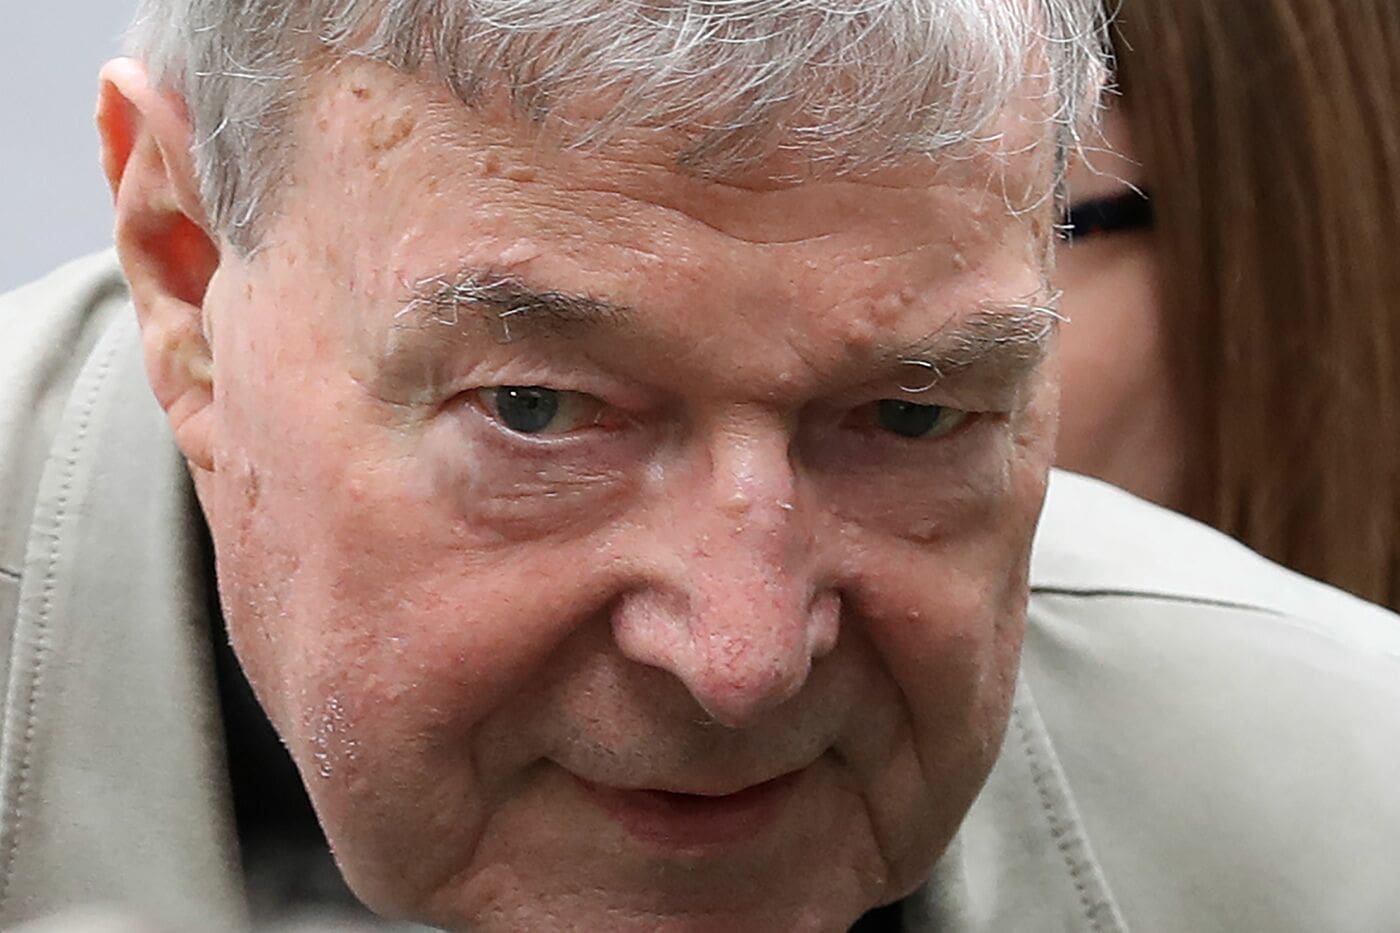 Cardinal George Pell walks from a car in Melbourne on February 26, 2019. - Australian Cardinal George Pell, who helped elect popes and ran the Vatican's finances, has been found guilty of sexually assaulting two choirboys, becoming the most senior Catholic cleric ever convicted of child sex crimes. (Photo by CON CHRONIS / AFP)